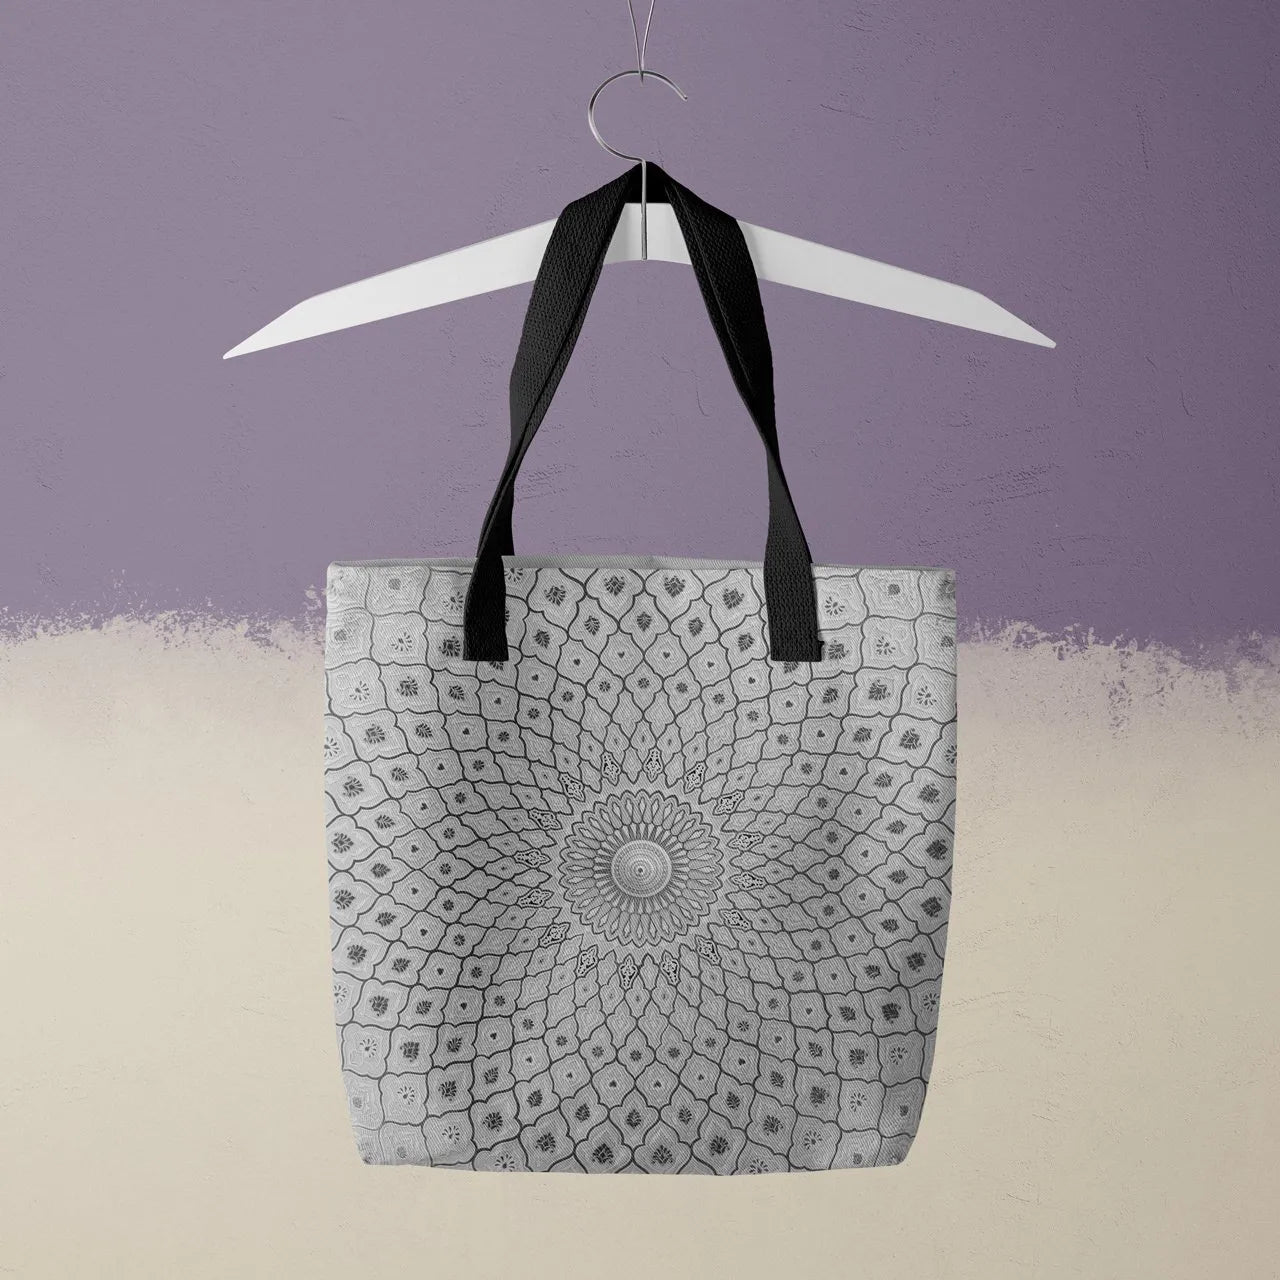 Divine Order Tote - Black And White - Heavy Duty Reusable Grocery Bag - Black Handles - Shopping Totes - Aesthetic Art